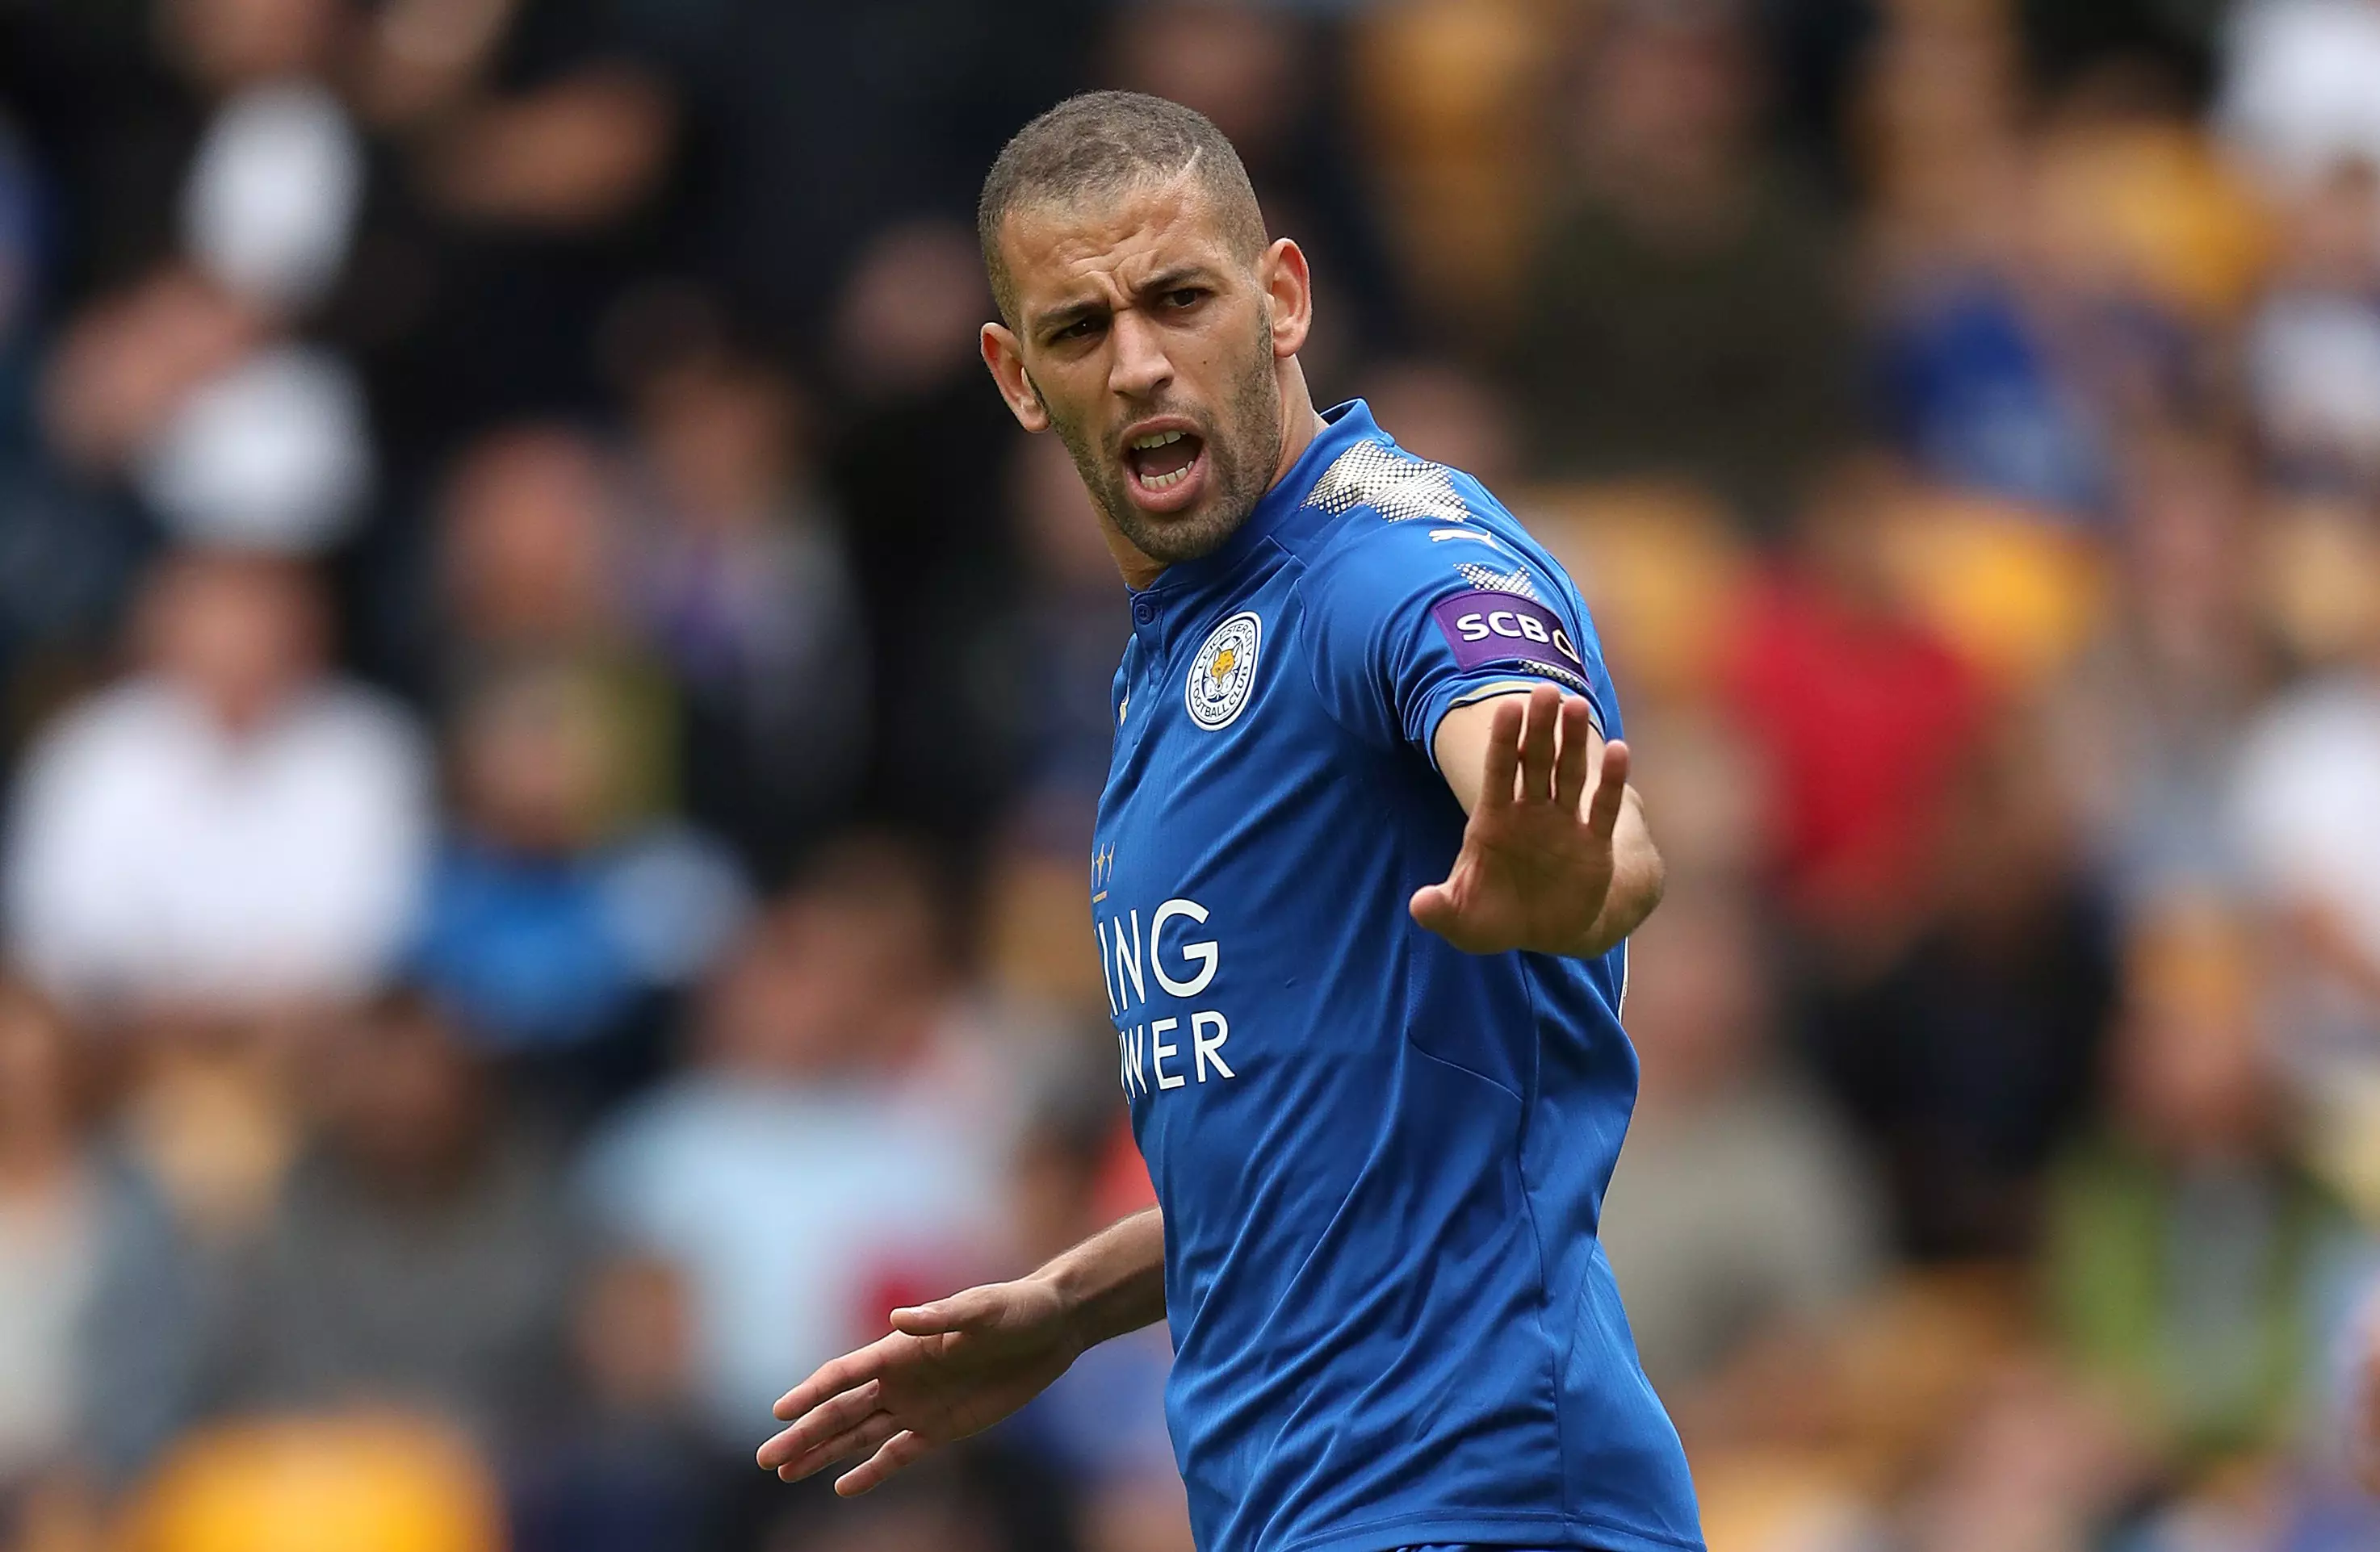 Slimani in action for the Foxes. Image: PA